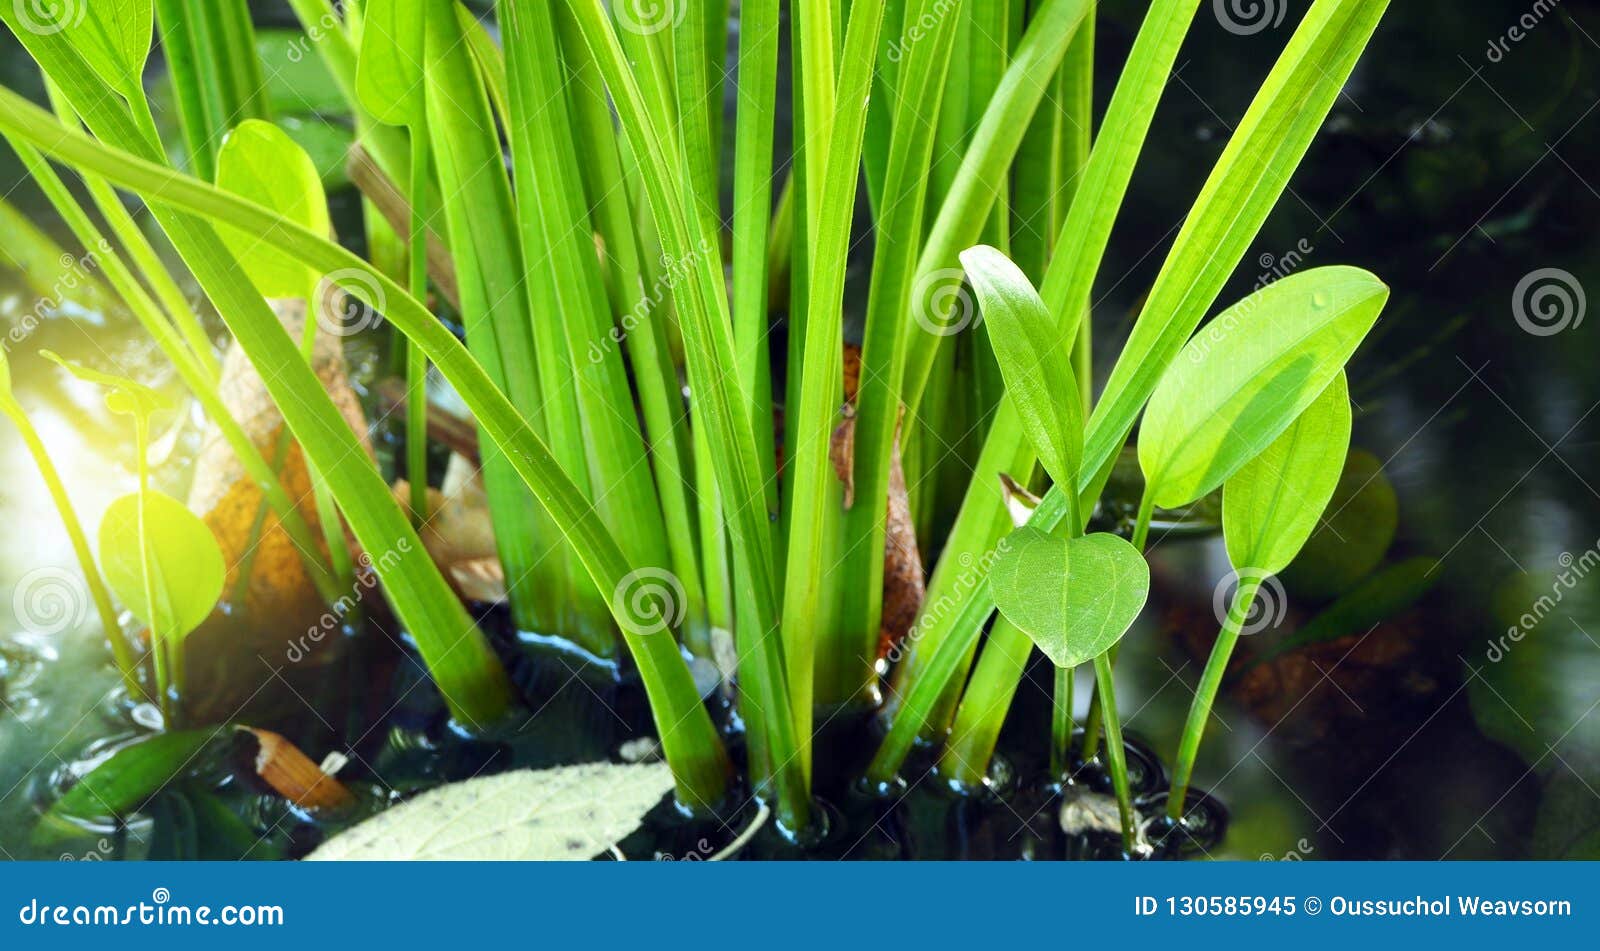 Aquatic plant in swamp stock image. Image of green, plant - 130585945